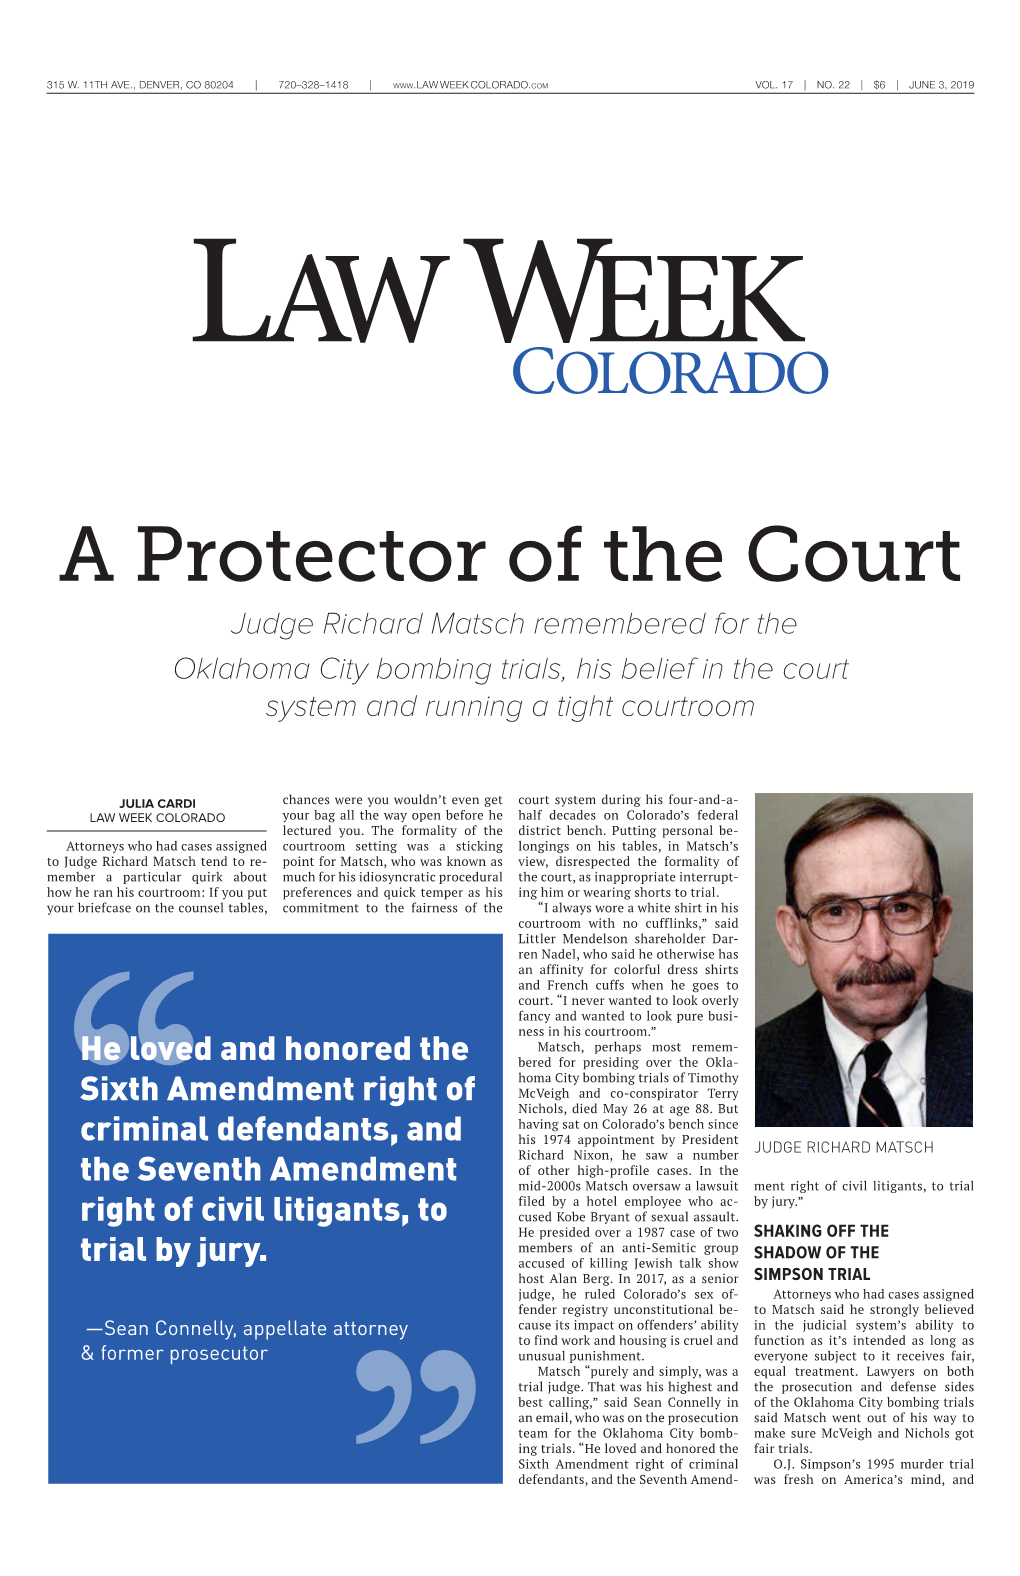 “A Protector of the Court,” Law Week Colorado